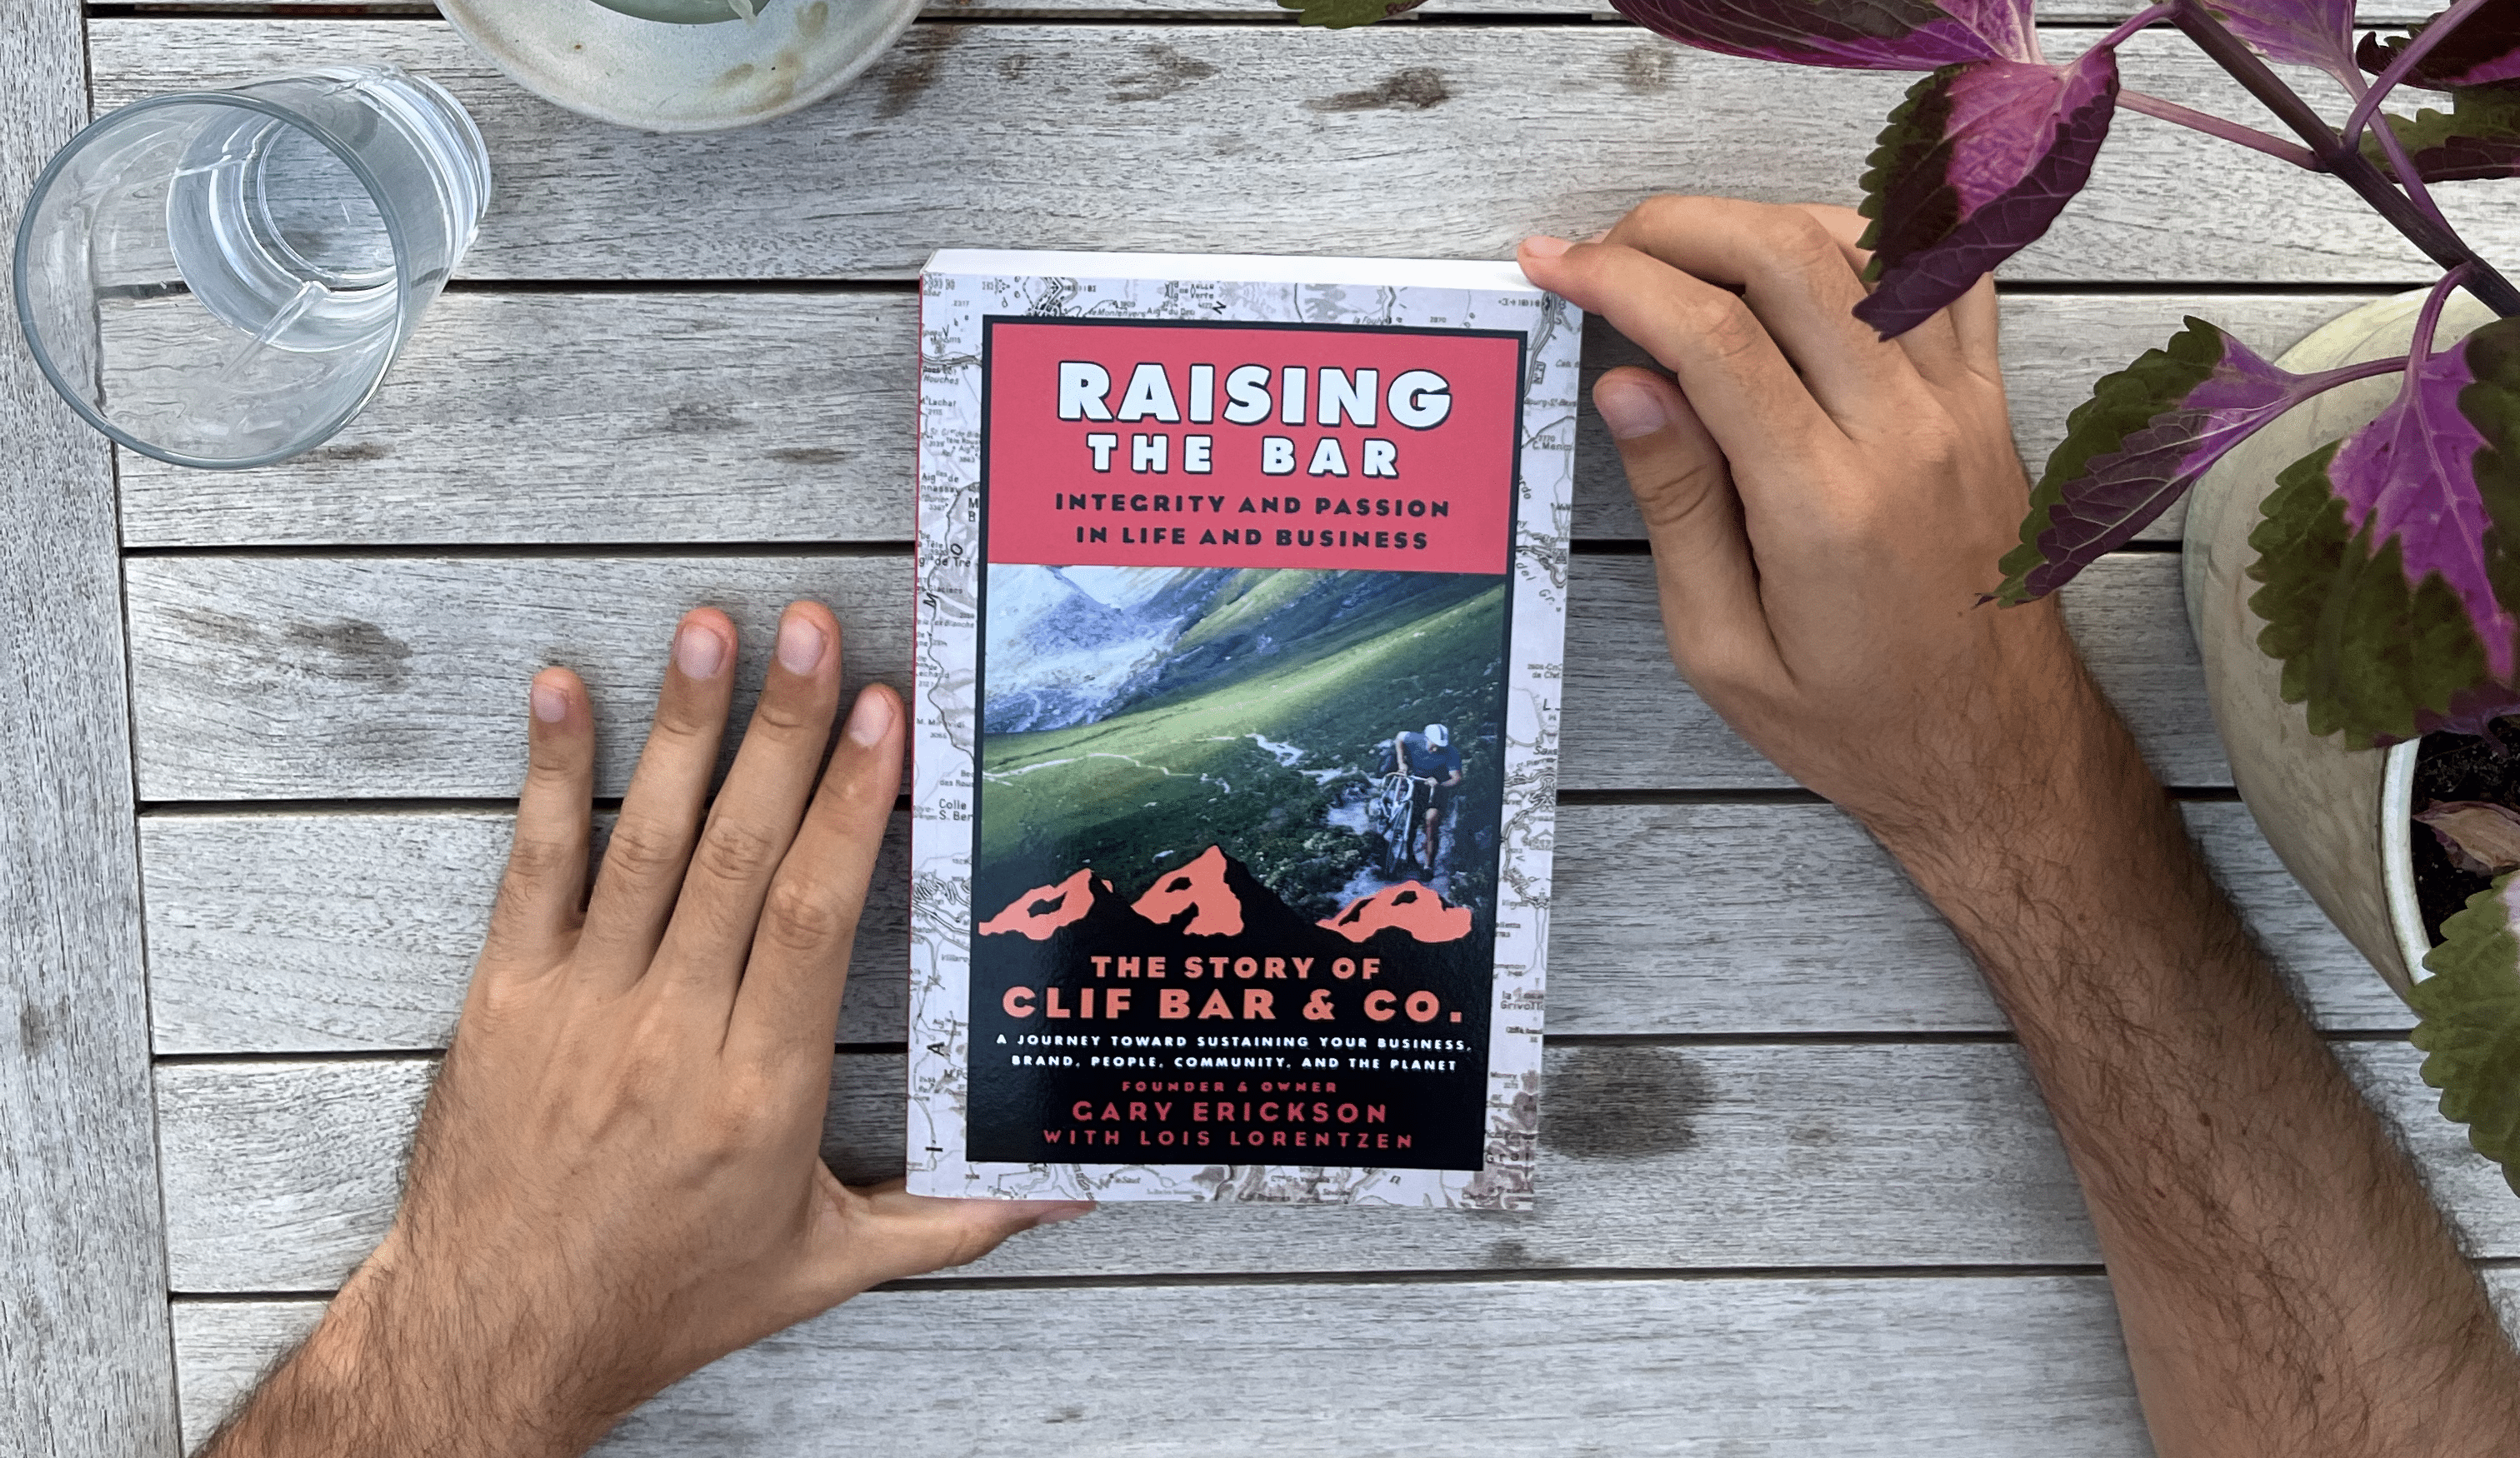 Summary: Raising the Bar: Integrity and Passion in Life and Business: The Story of Clif Bar Inc. by Gary Erickson and Lois Lorentzen